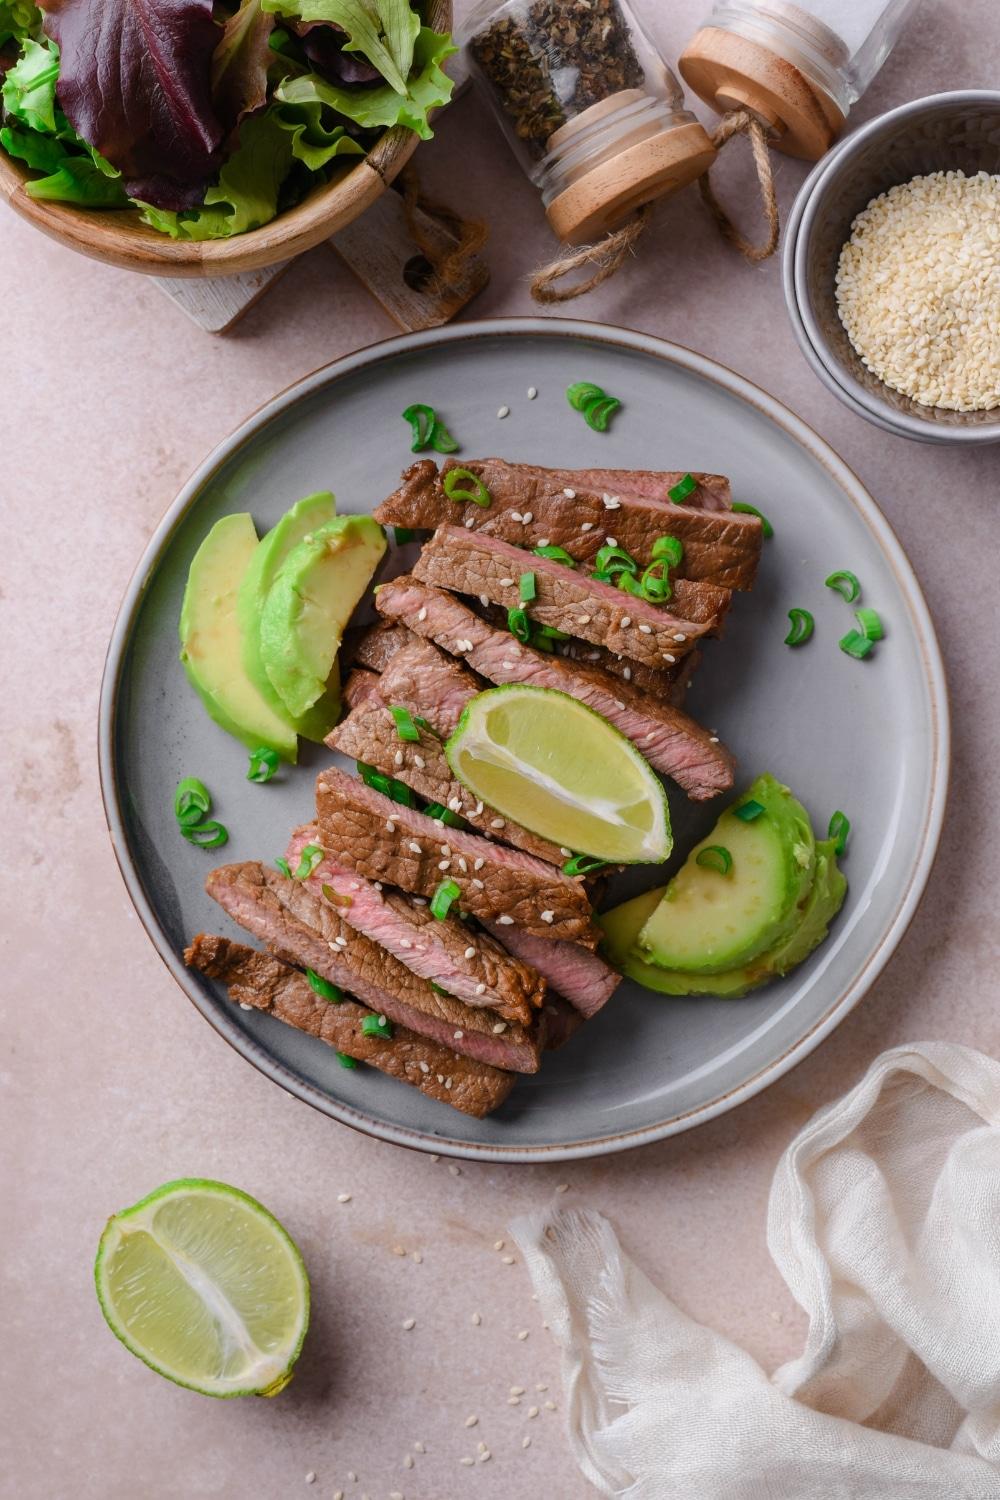 Sliced medium sirloin tip steak on a plate served with avocado slices and garnished with lime wedges and chopped green onion.